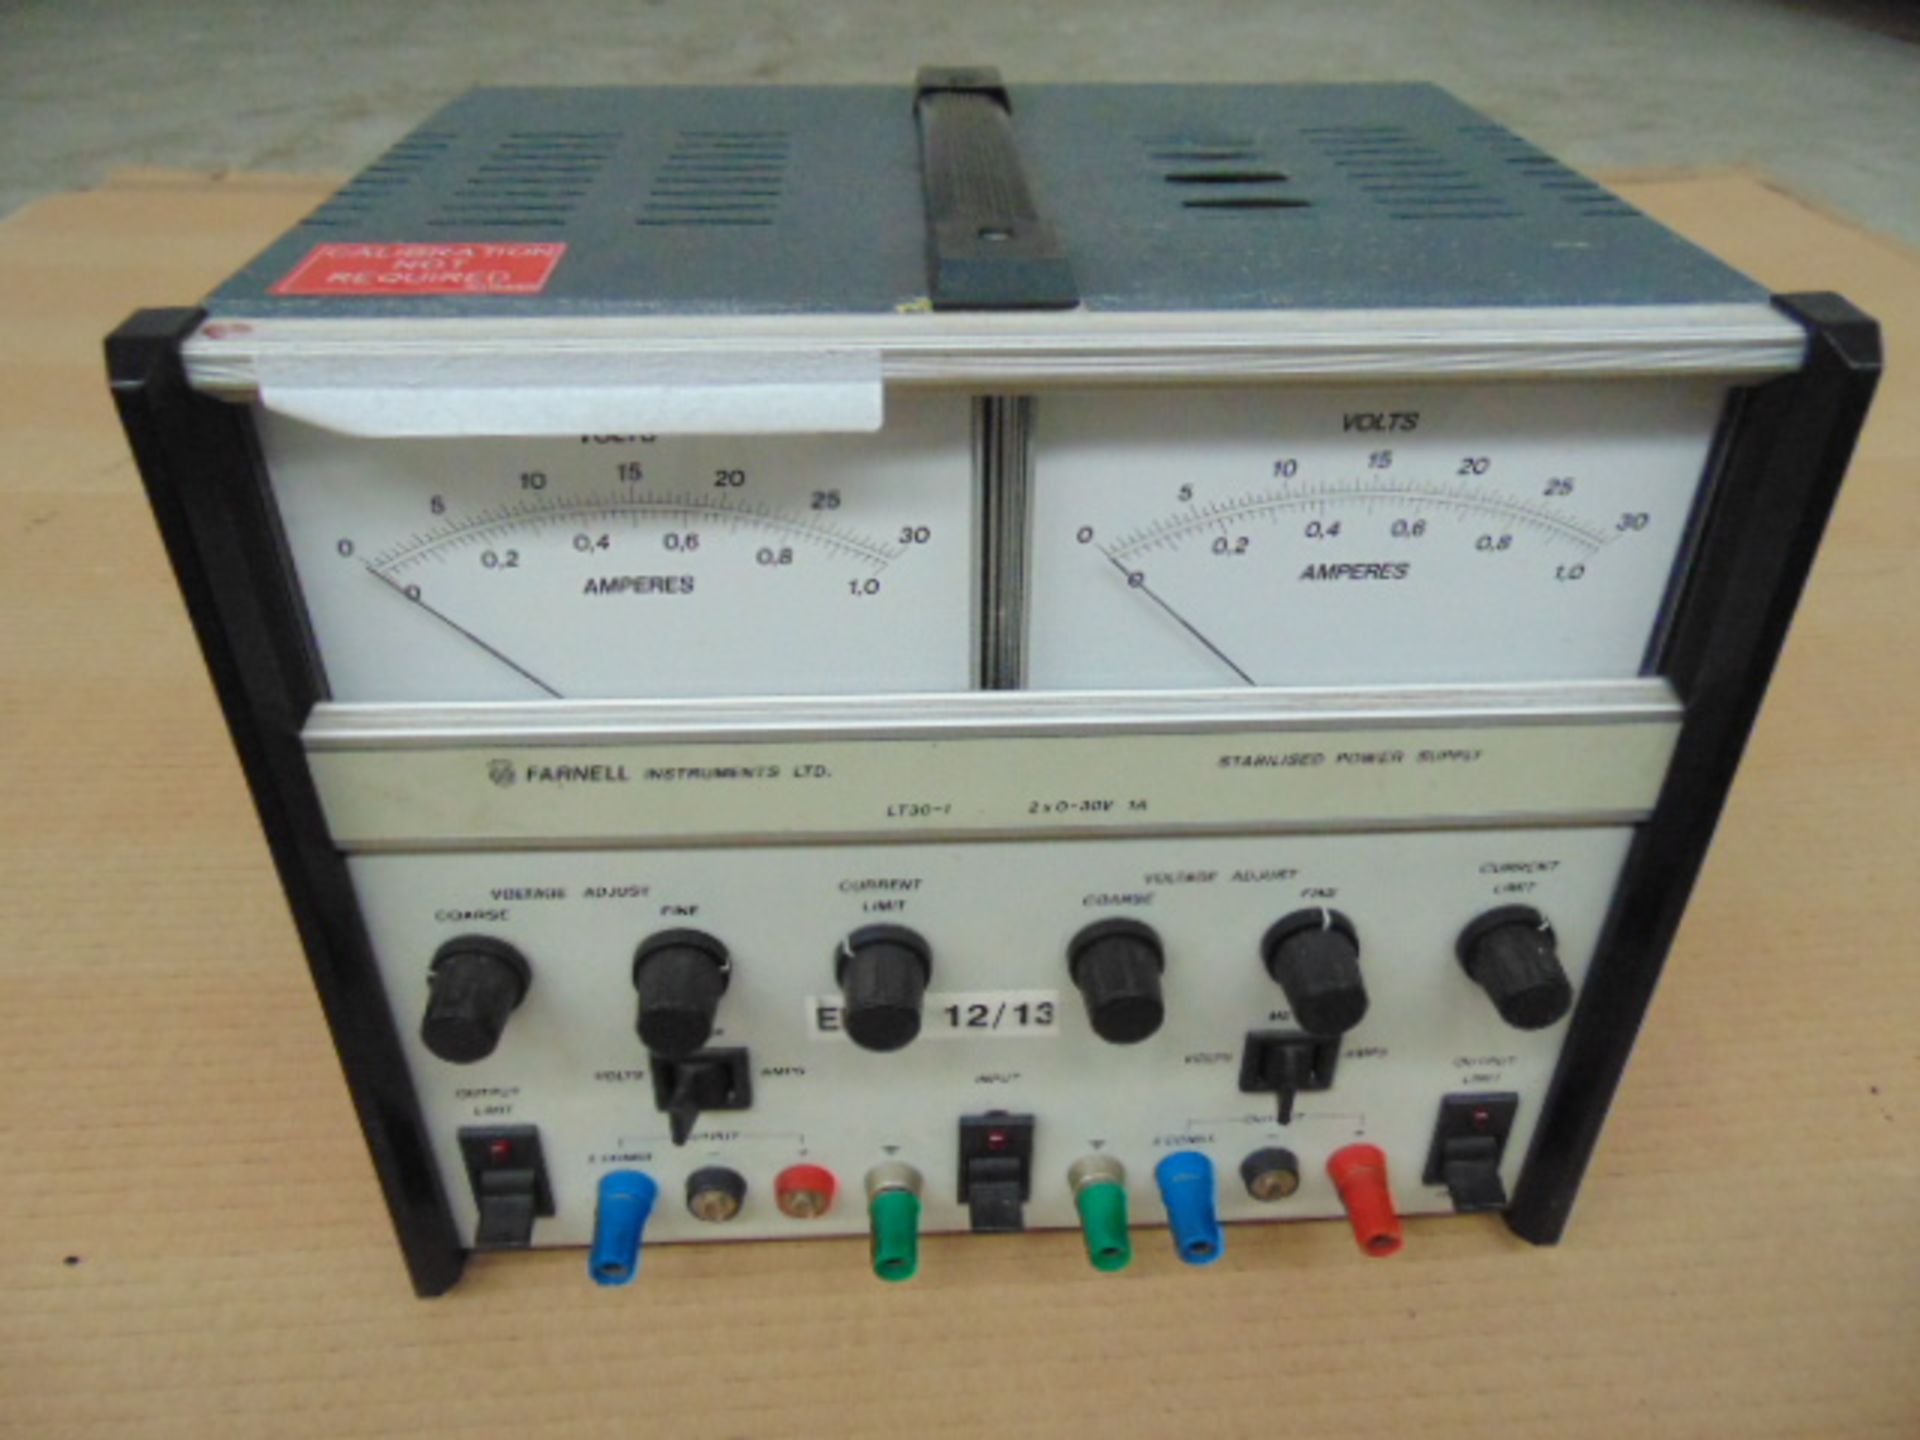 You are bidding on a Farnell LT30-1 Stabilised Power Supply. This Farnell Stabilised Power Supply